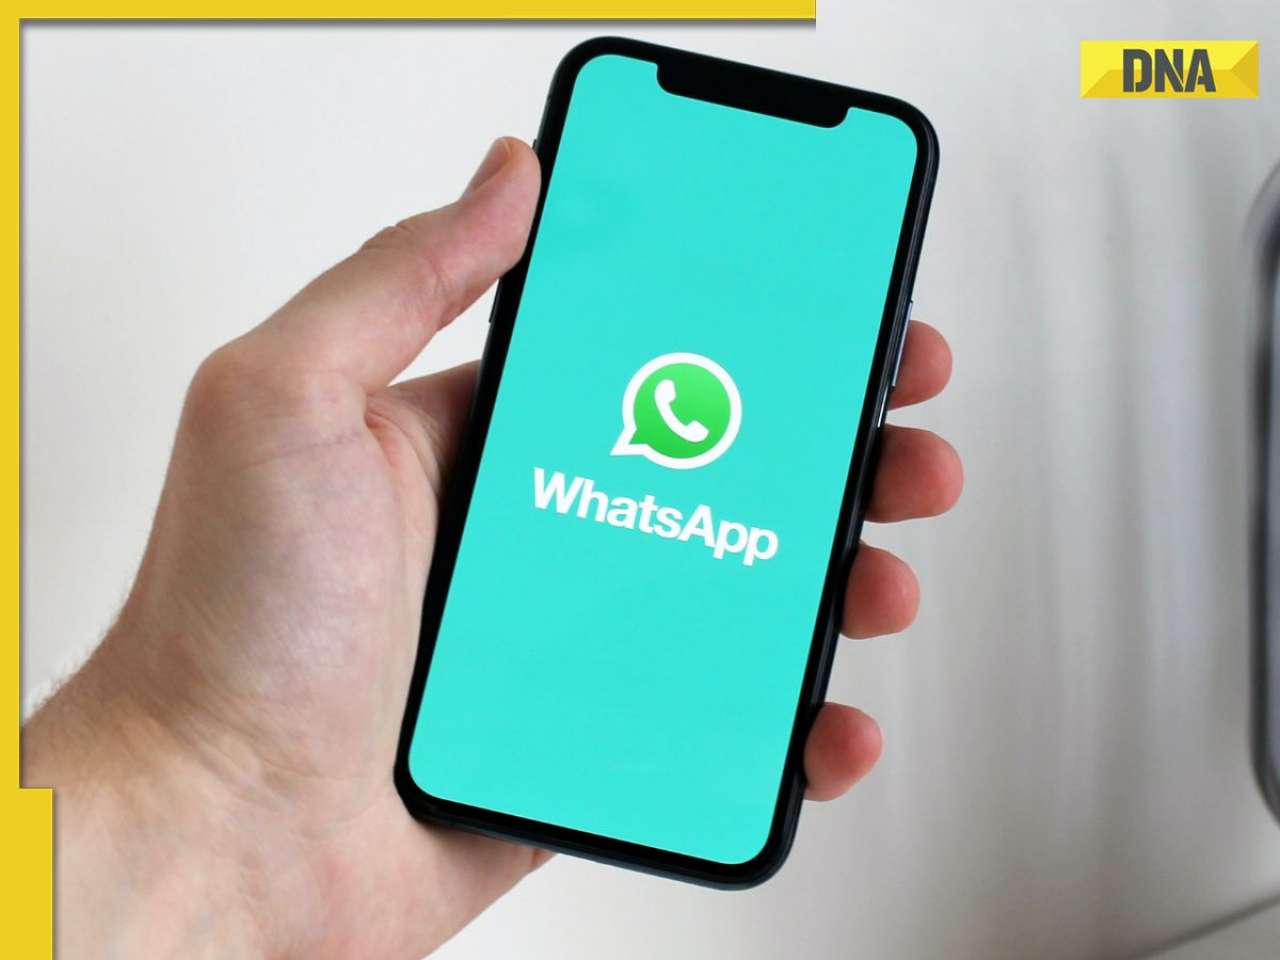 WhatsApp working on new feature for Apple iPhone users, will allow them to…